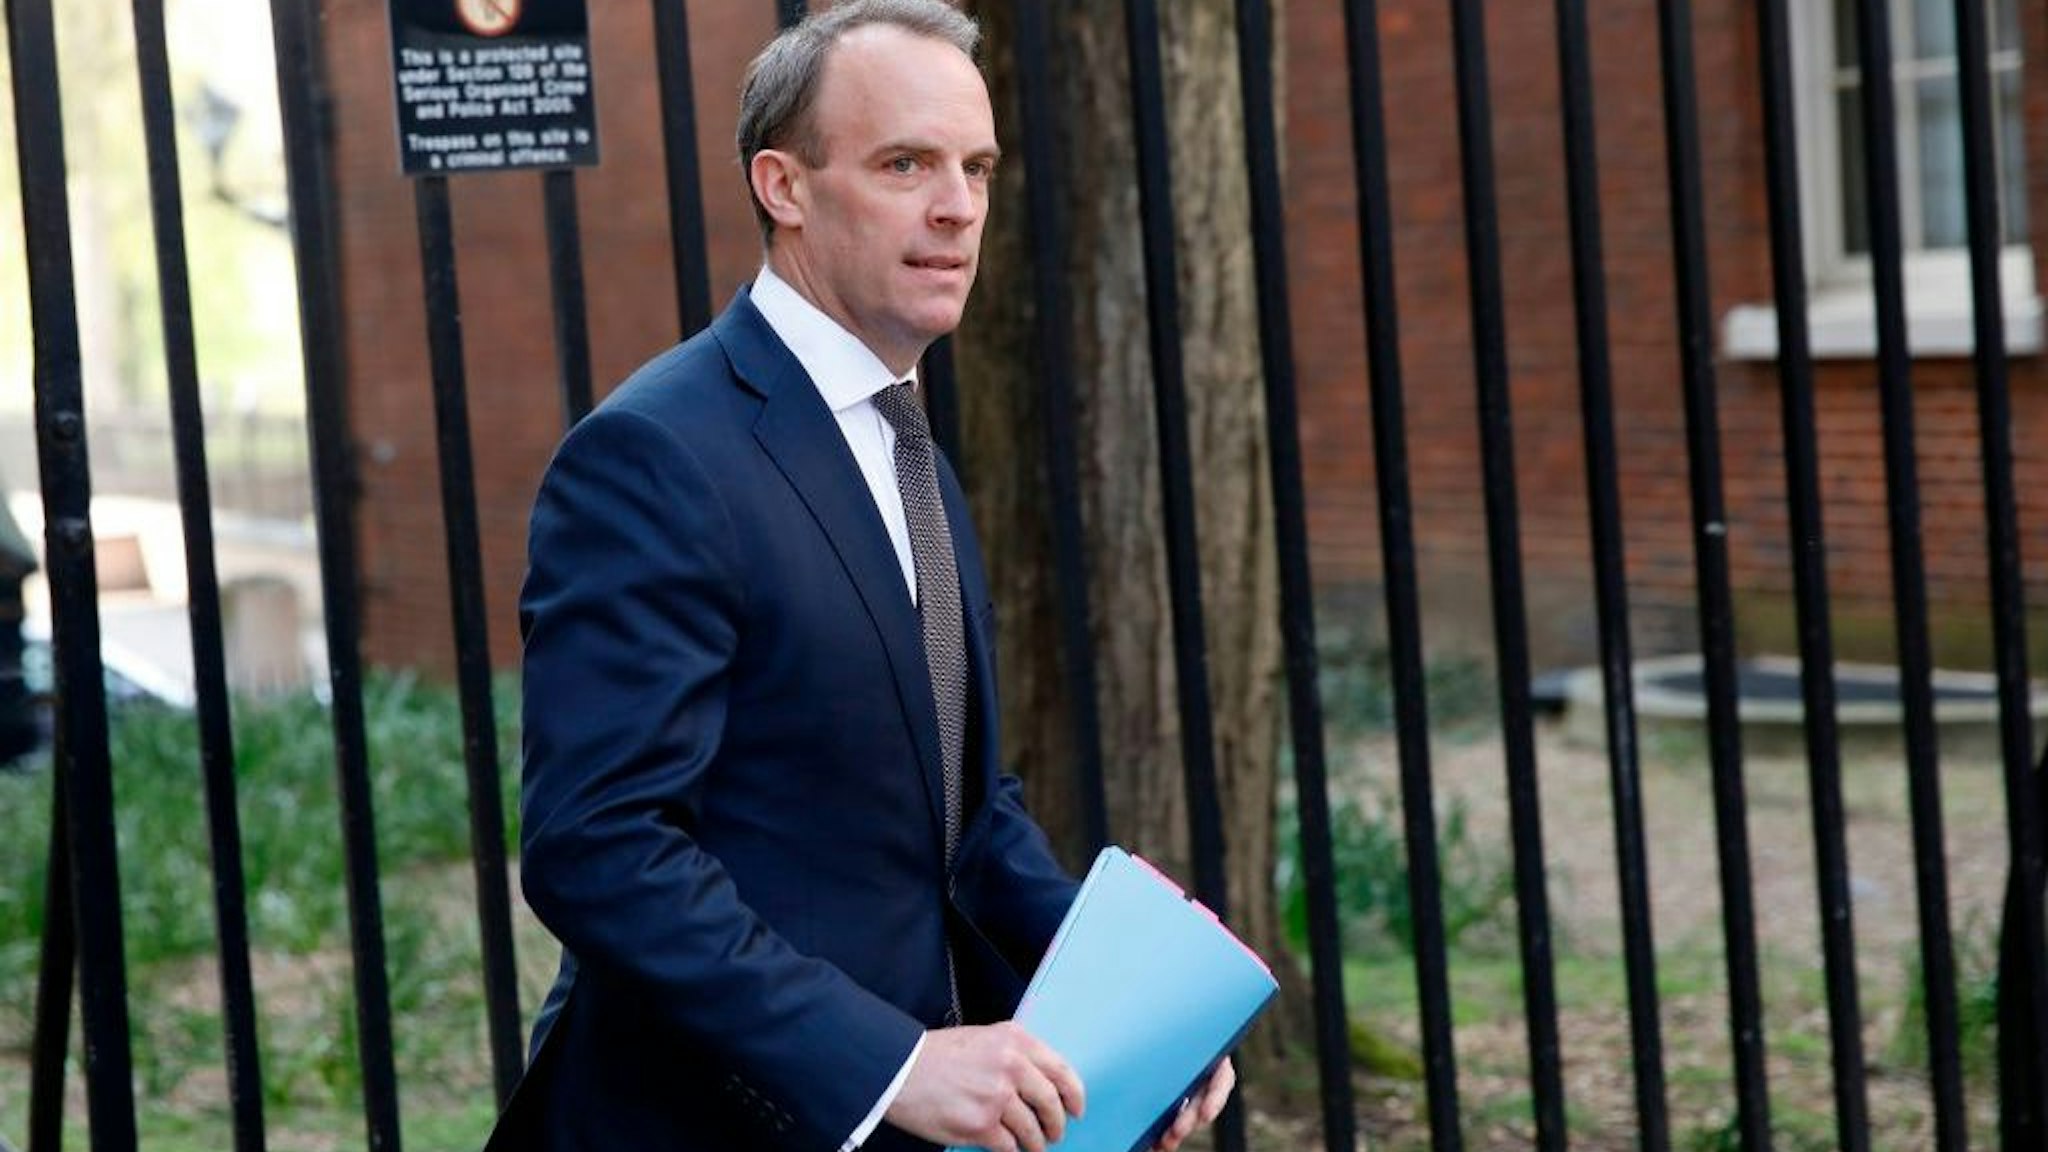 Britain's Foreign Secretary Dominic Raab arrives for a COBRA meeting at 10 Downing street in central London on April 9, 2020. - British Prime Minister Boris Johnson's health "continues to improve" on his fourth day in COVID-19 intensive care, his spokesman said Thursday, while the government prepared to extend a nationwide lockdown. (Photo by Tolga AKMEN / AFP) (Photo by TOLGA AKMEN/AFP via Getty Images)